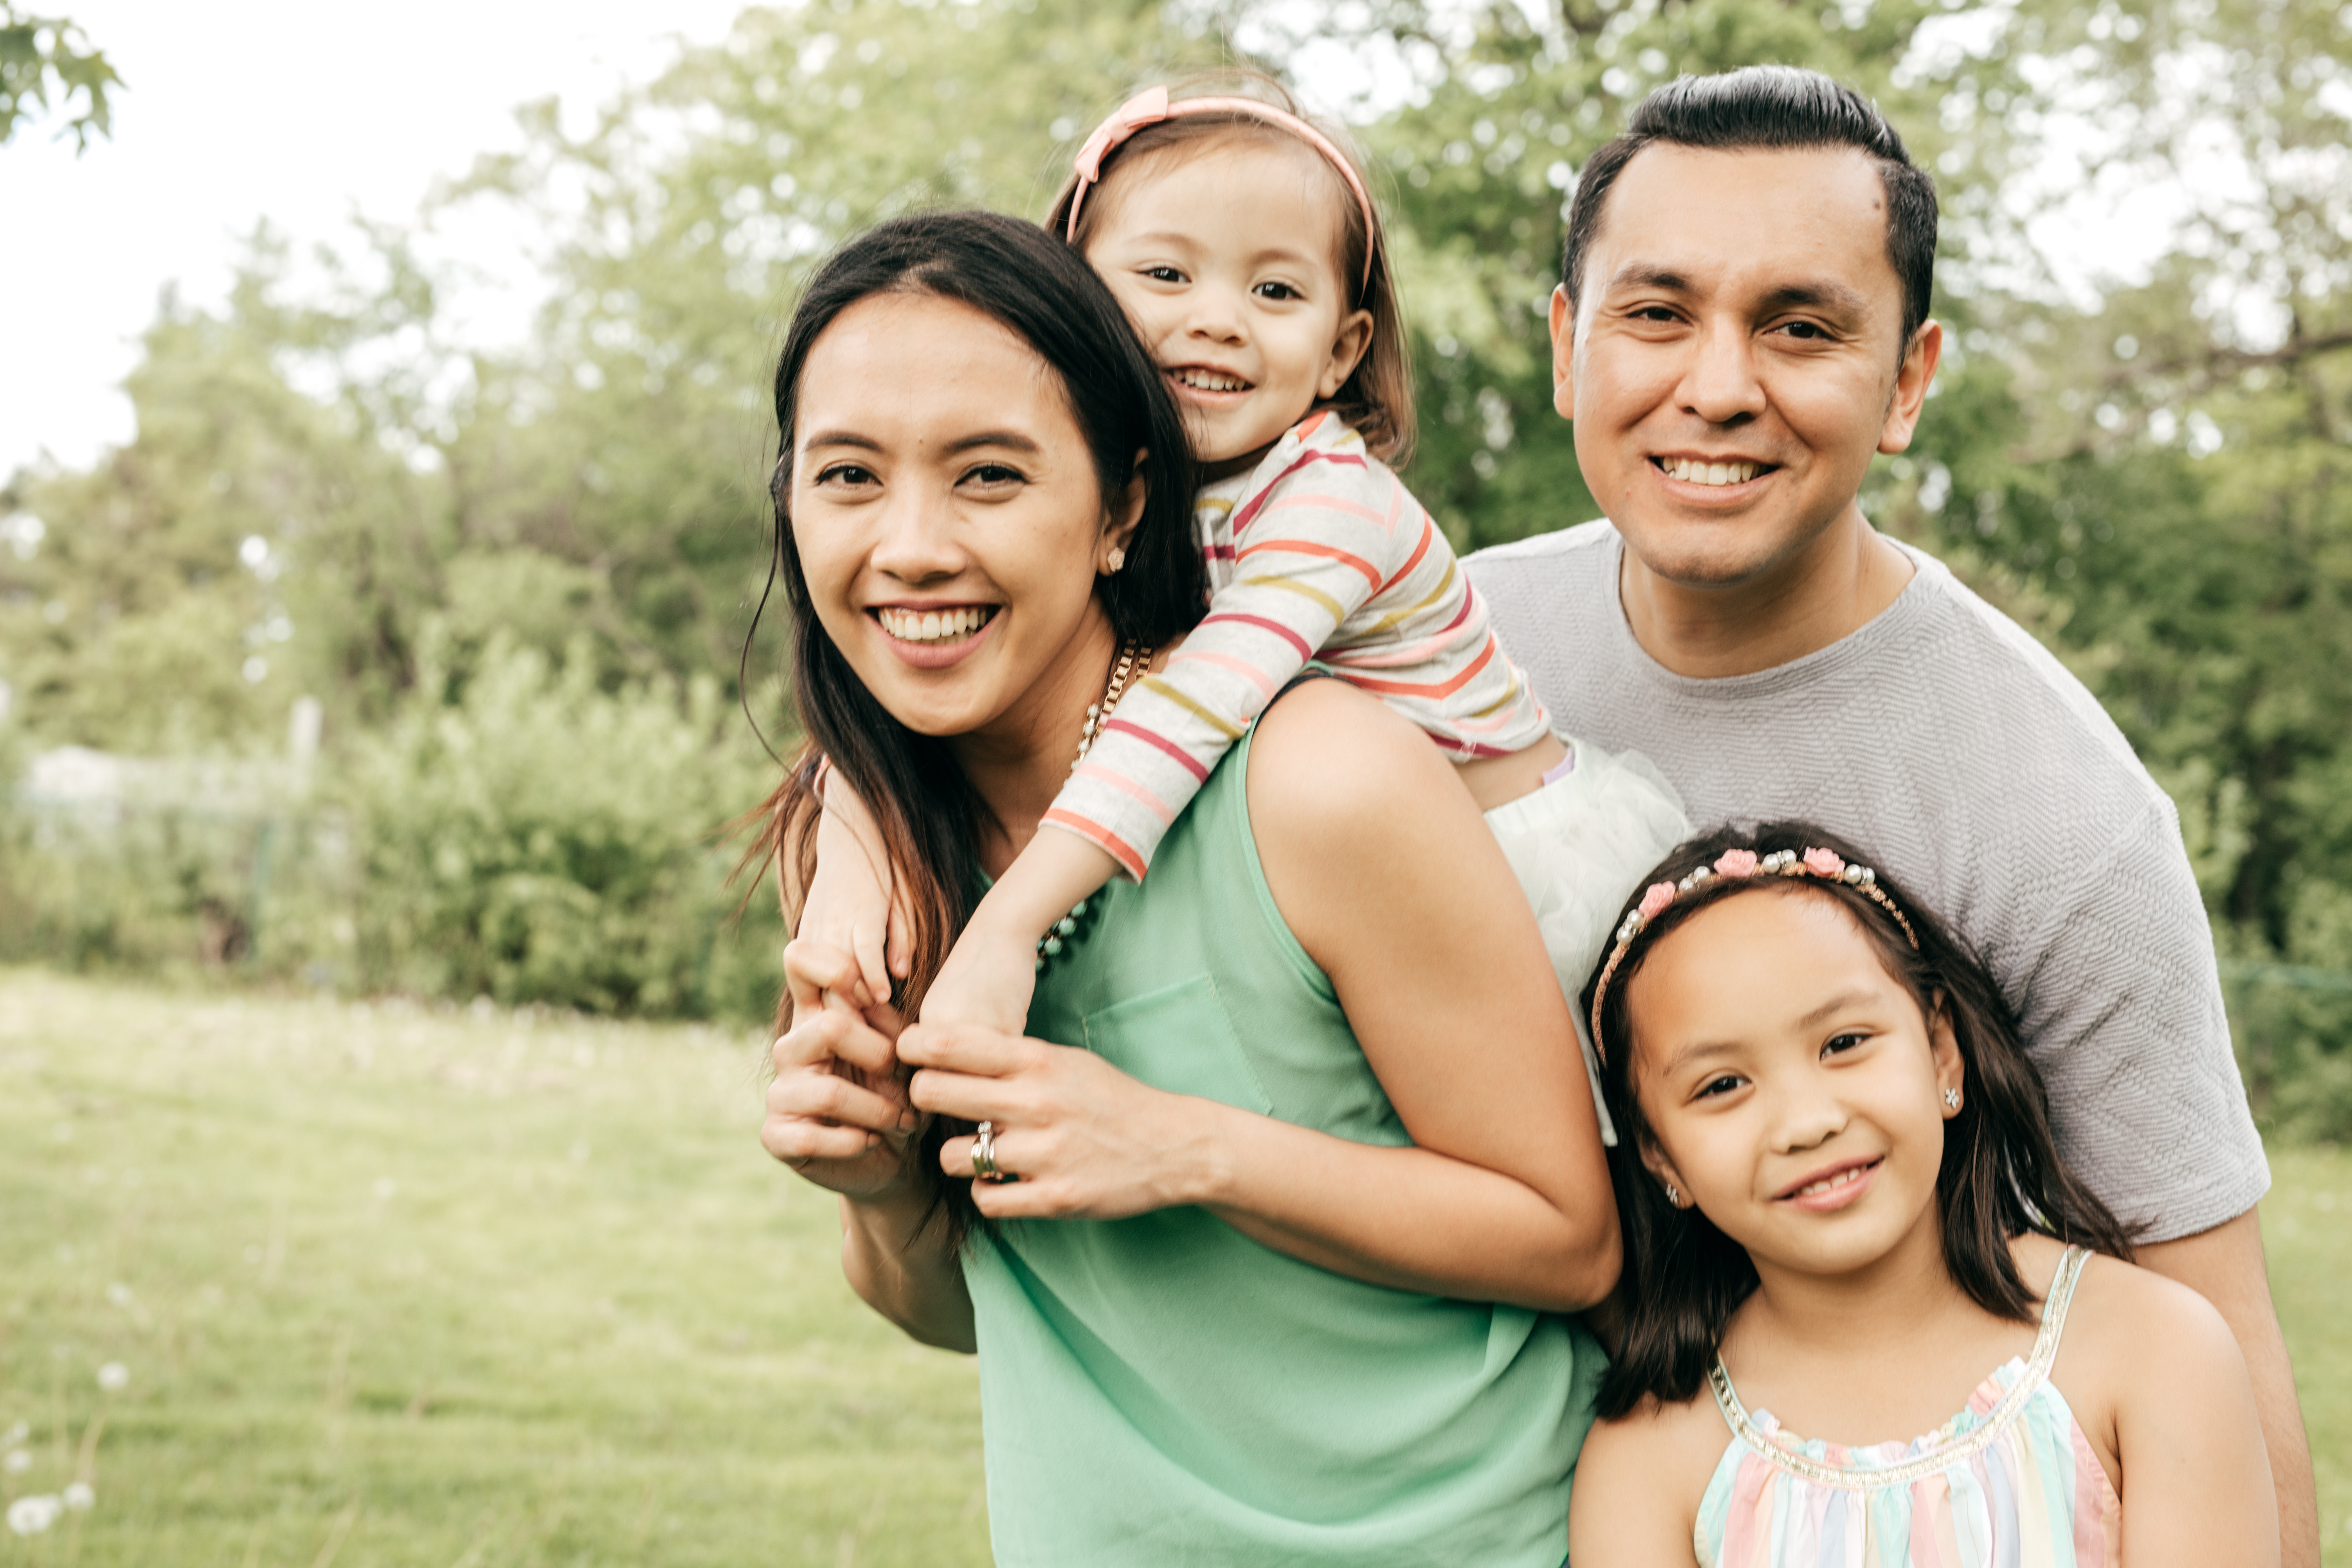 A happy family that has a healthier smile thanks to our Naperville family dental practice